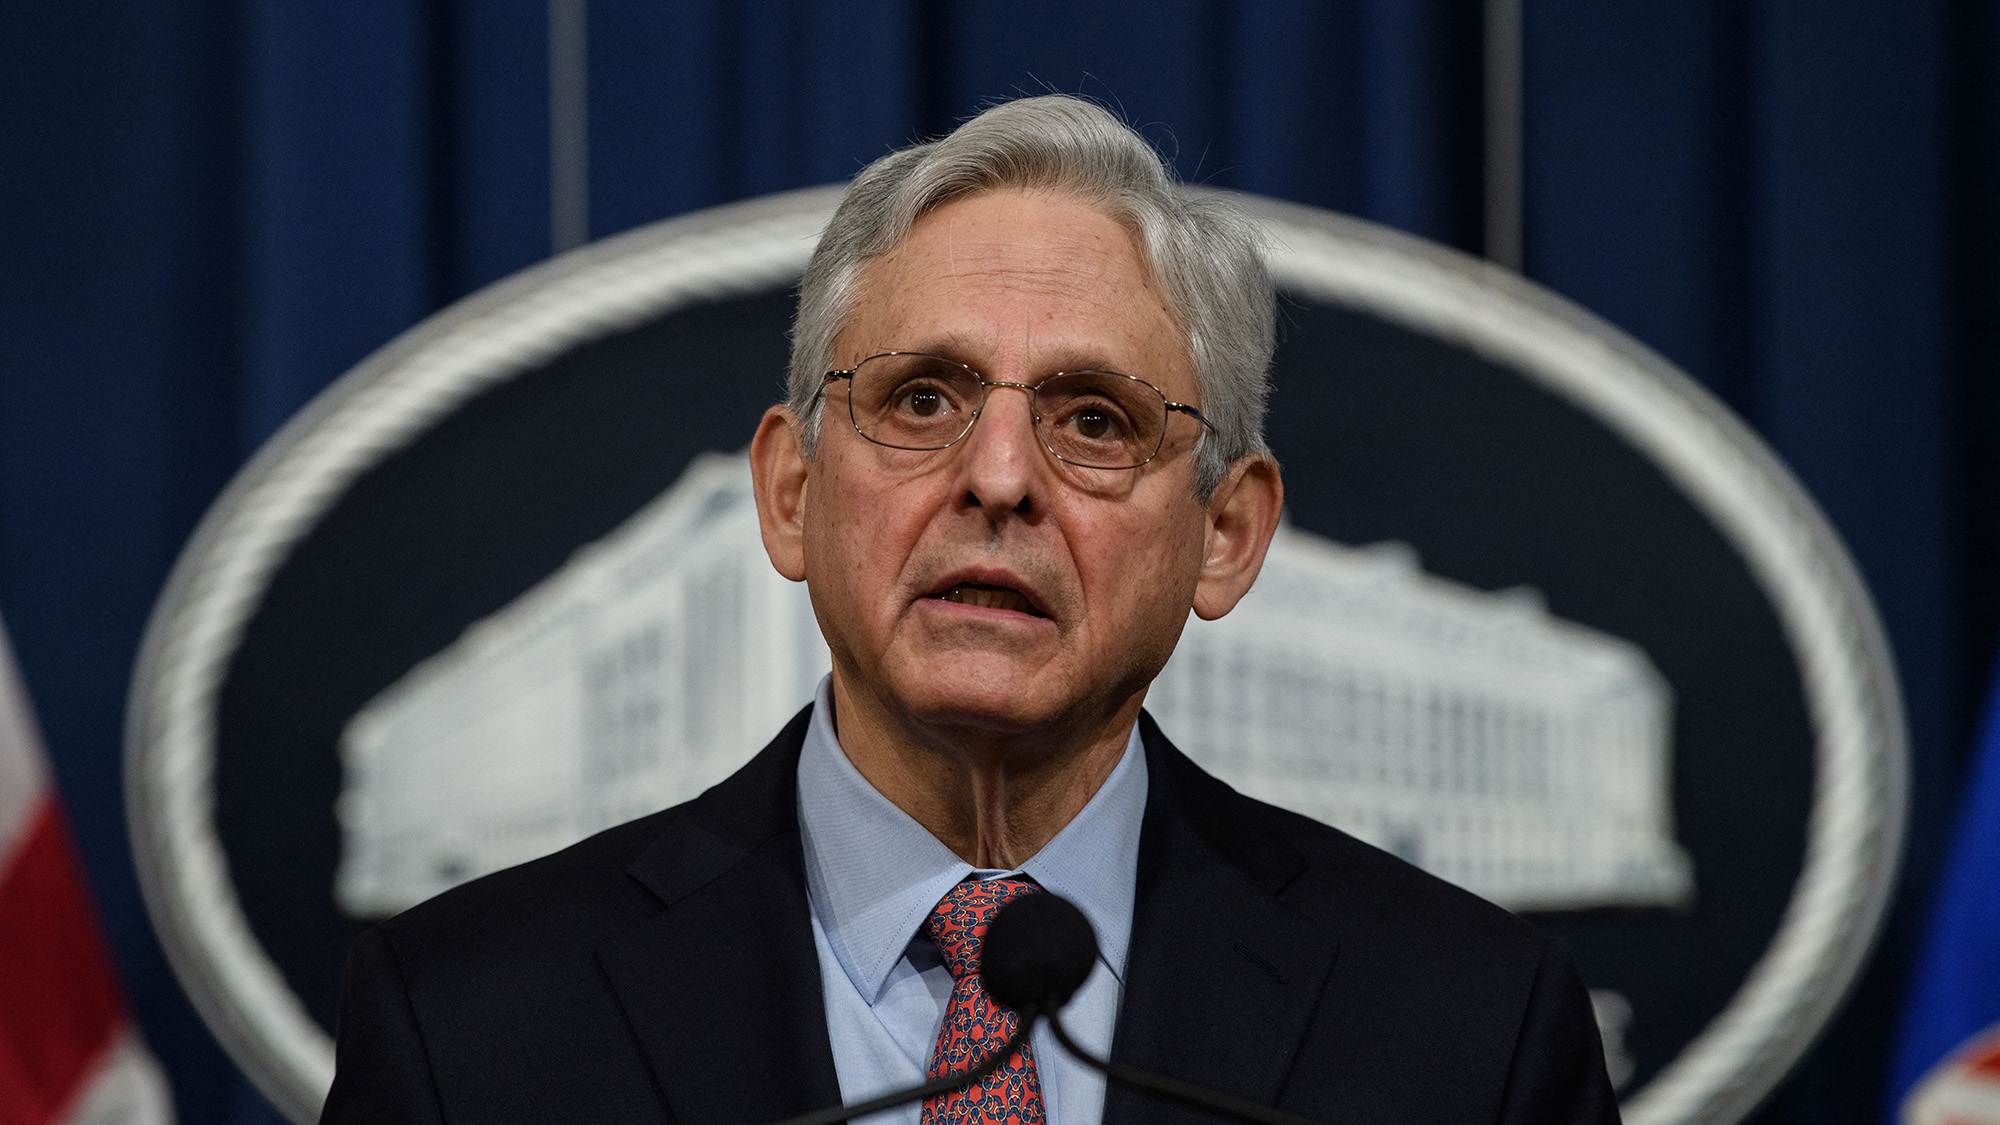 Attorney General Merrick Garland speaks to the press at the Justice Department in Washington, DC, on February 22, 2022.